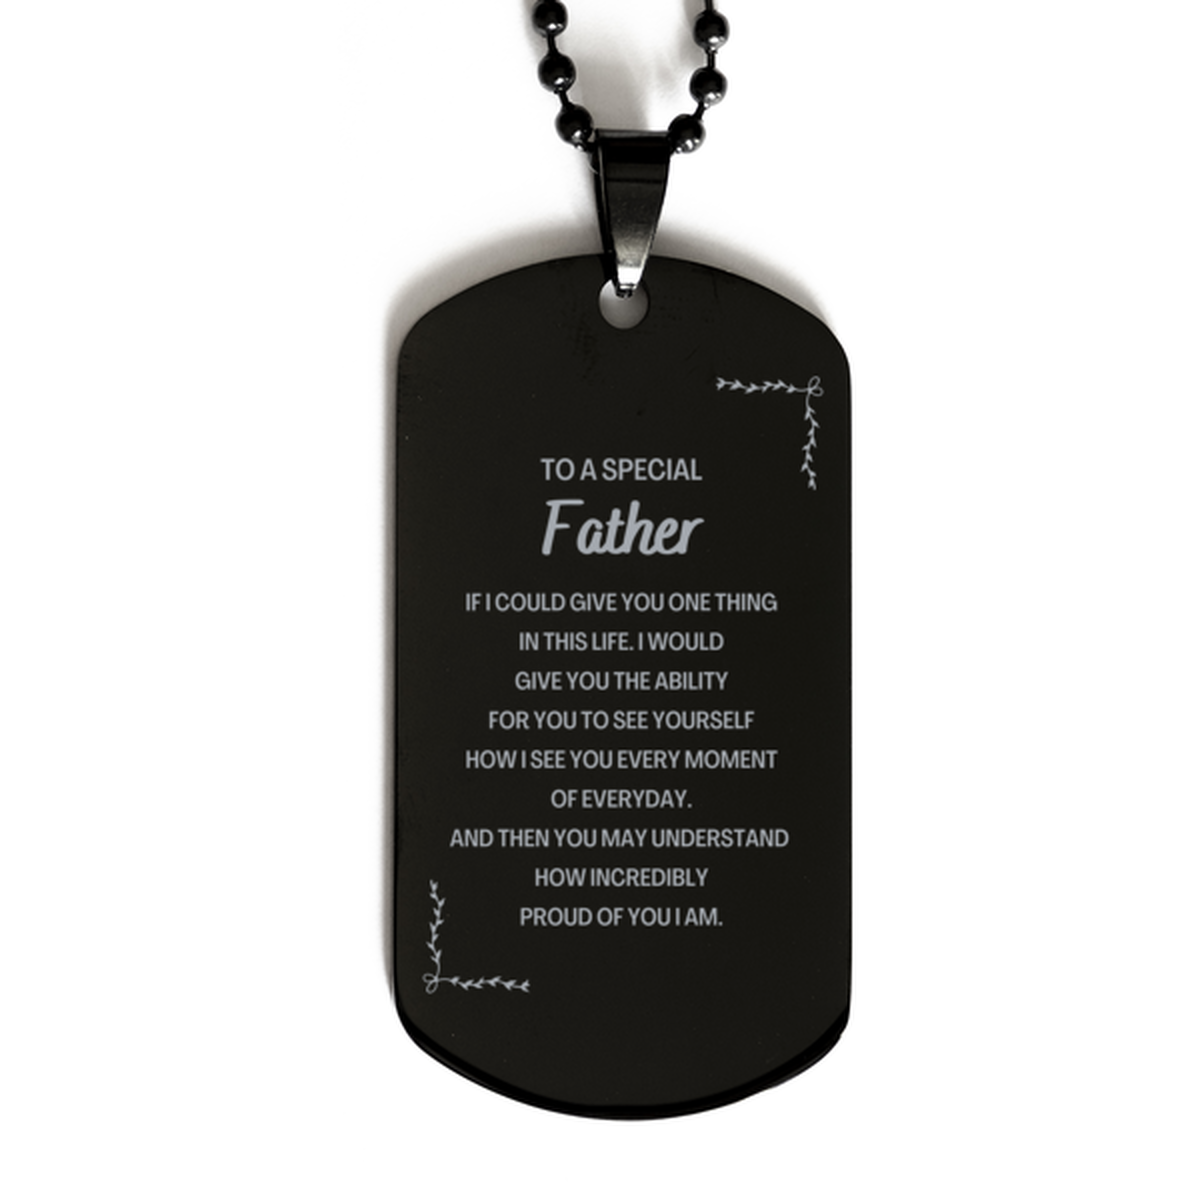 To My Father Black Dog Tag, Gifts For Father Engraved, Inspirational Gifts for Christmas Birthday, Epic Gifts for Father To A Special Father how incredibly proud of you I am